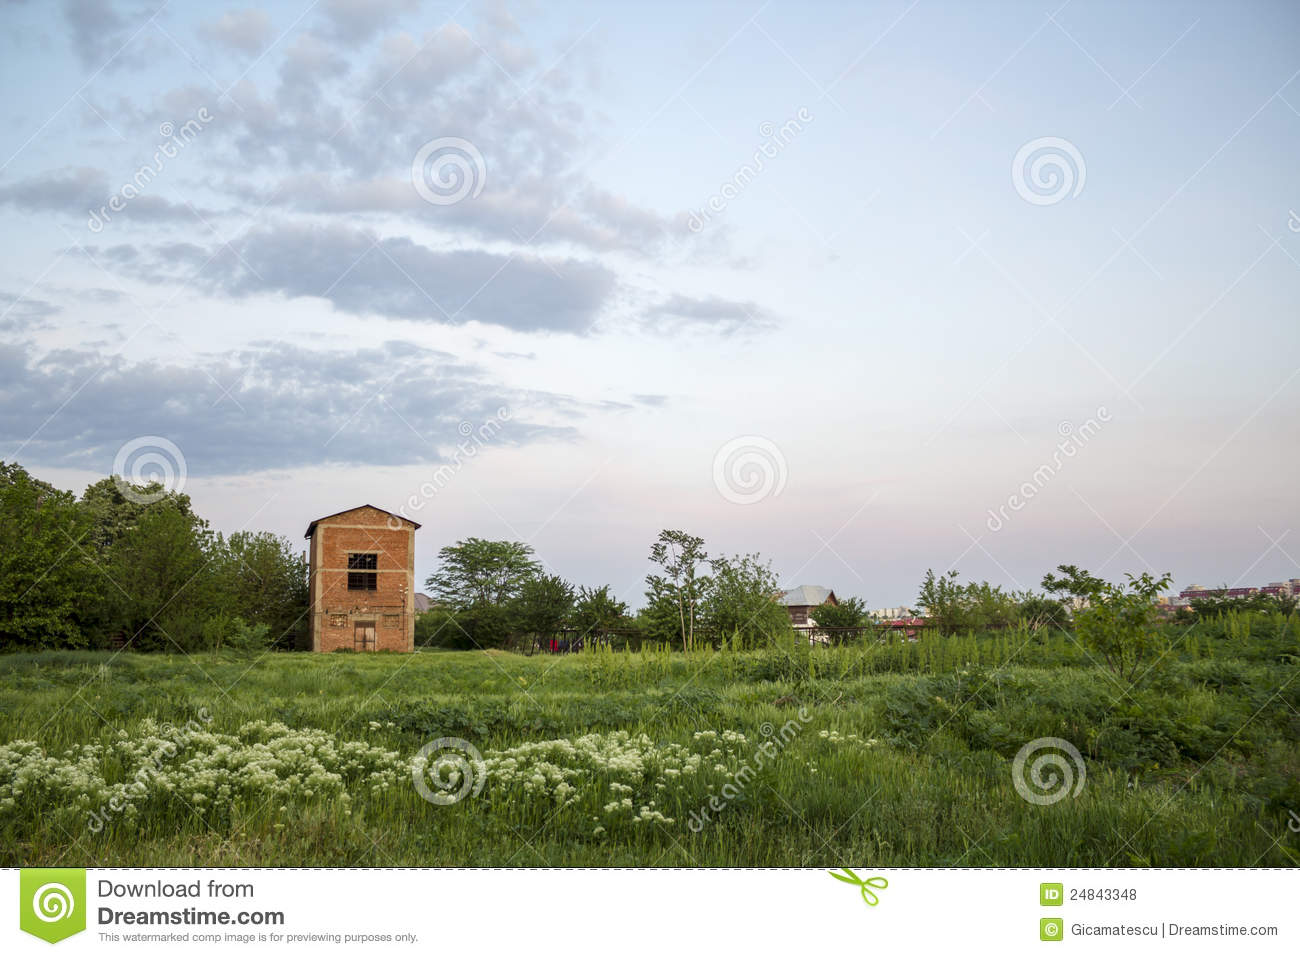 Vacant Land With A Unfinished Buildingduring The Evening